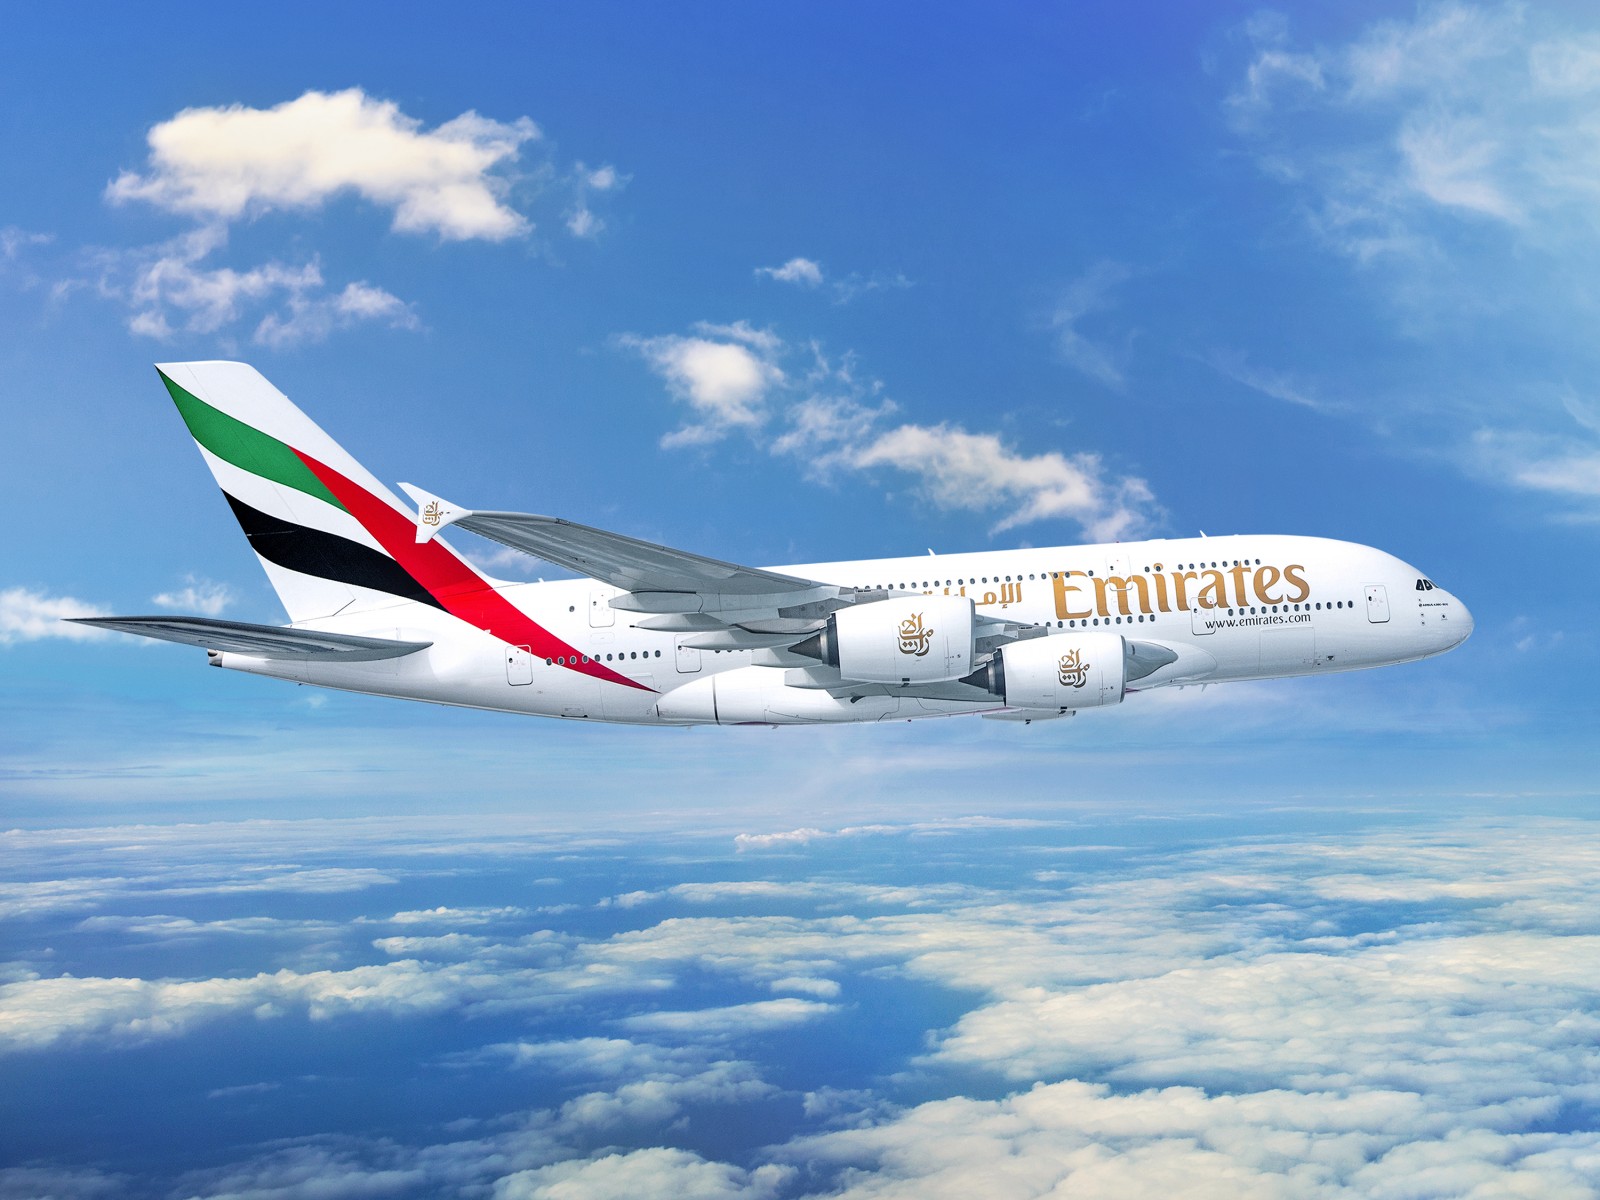 Flying High with Family: Unforgettable Emirates Airlines Adventure